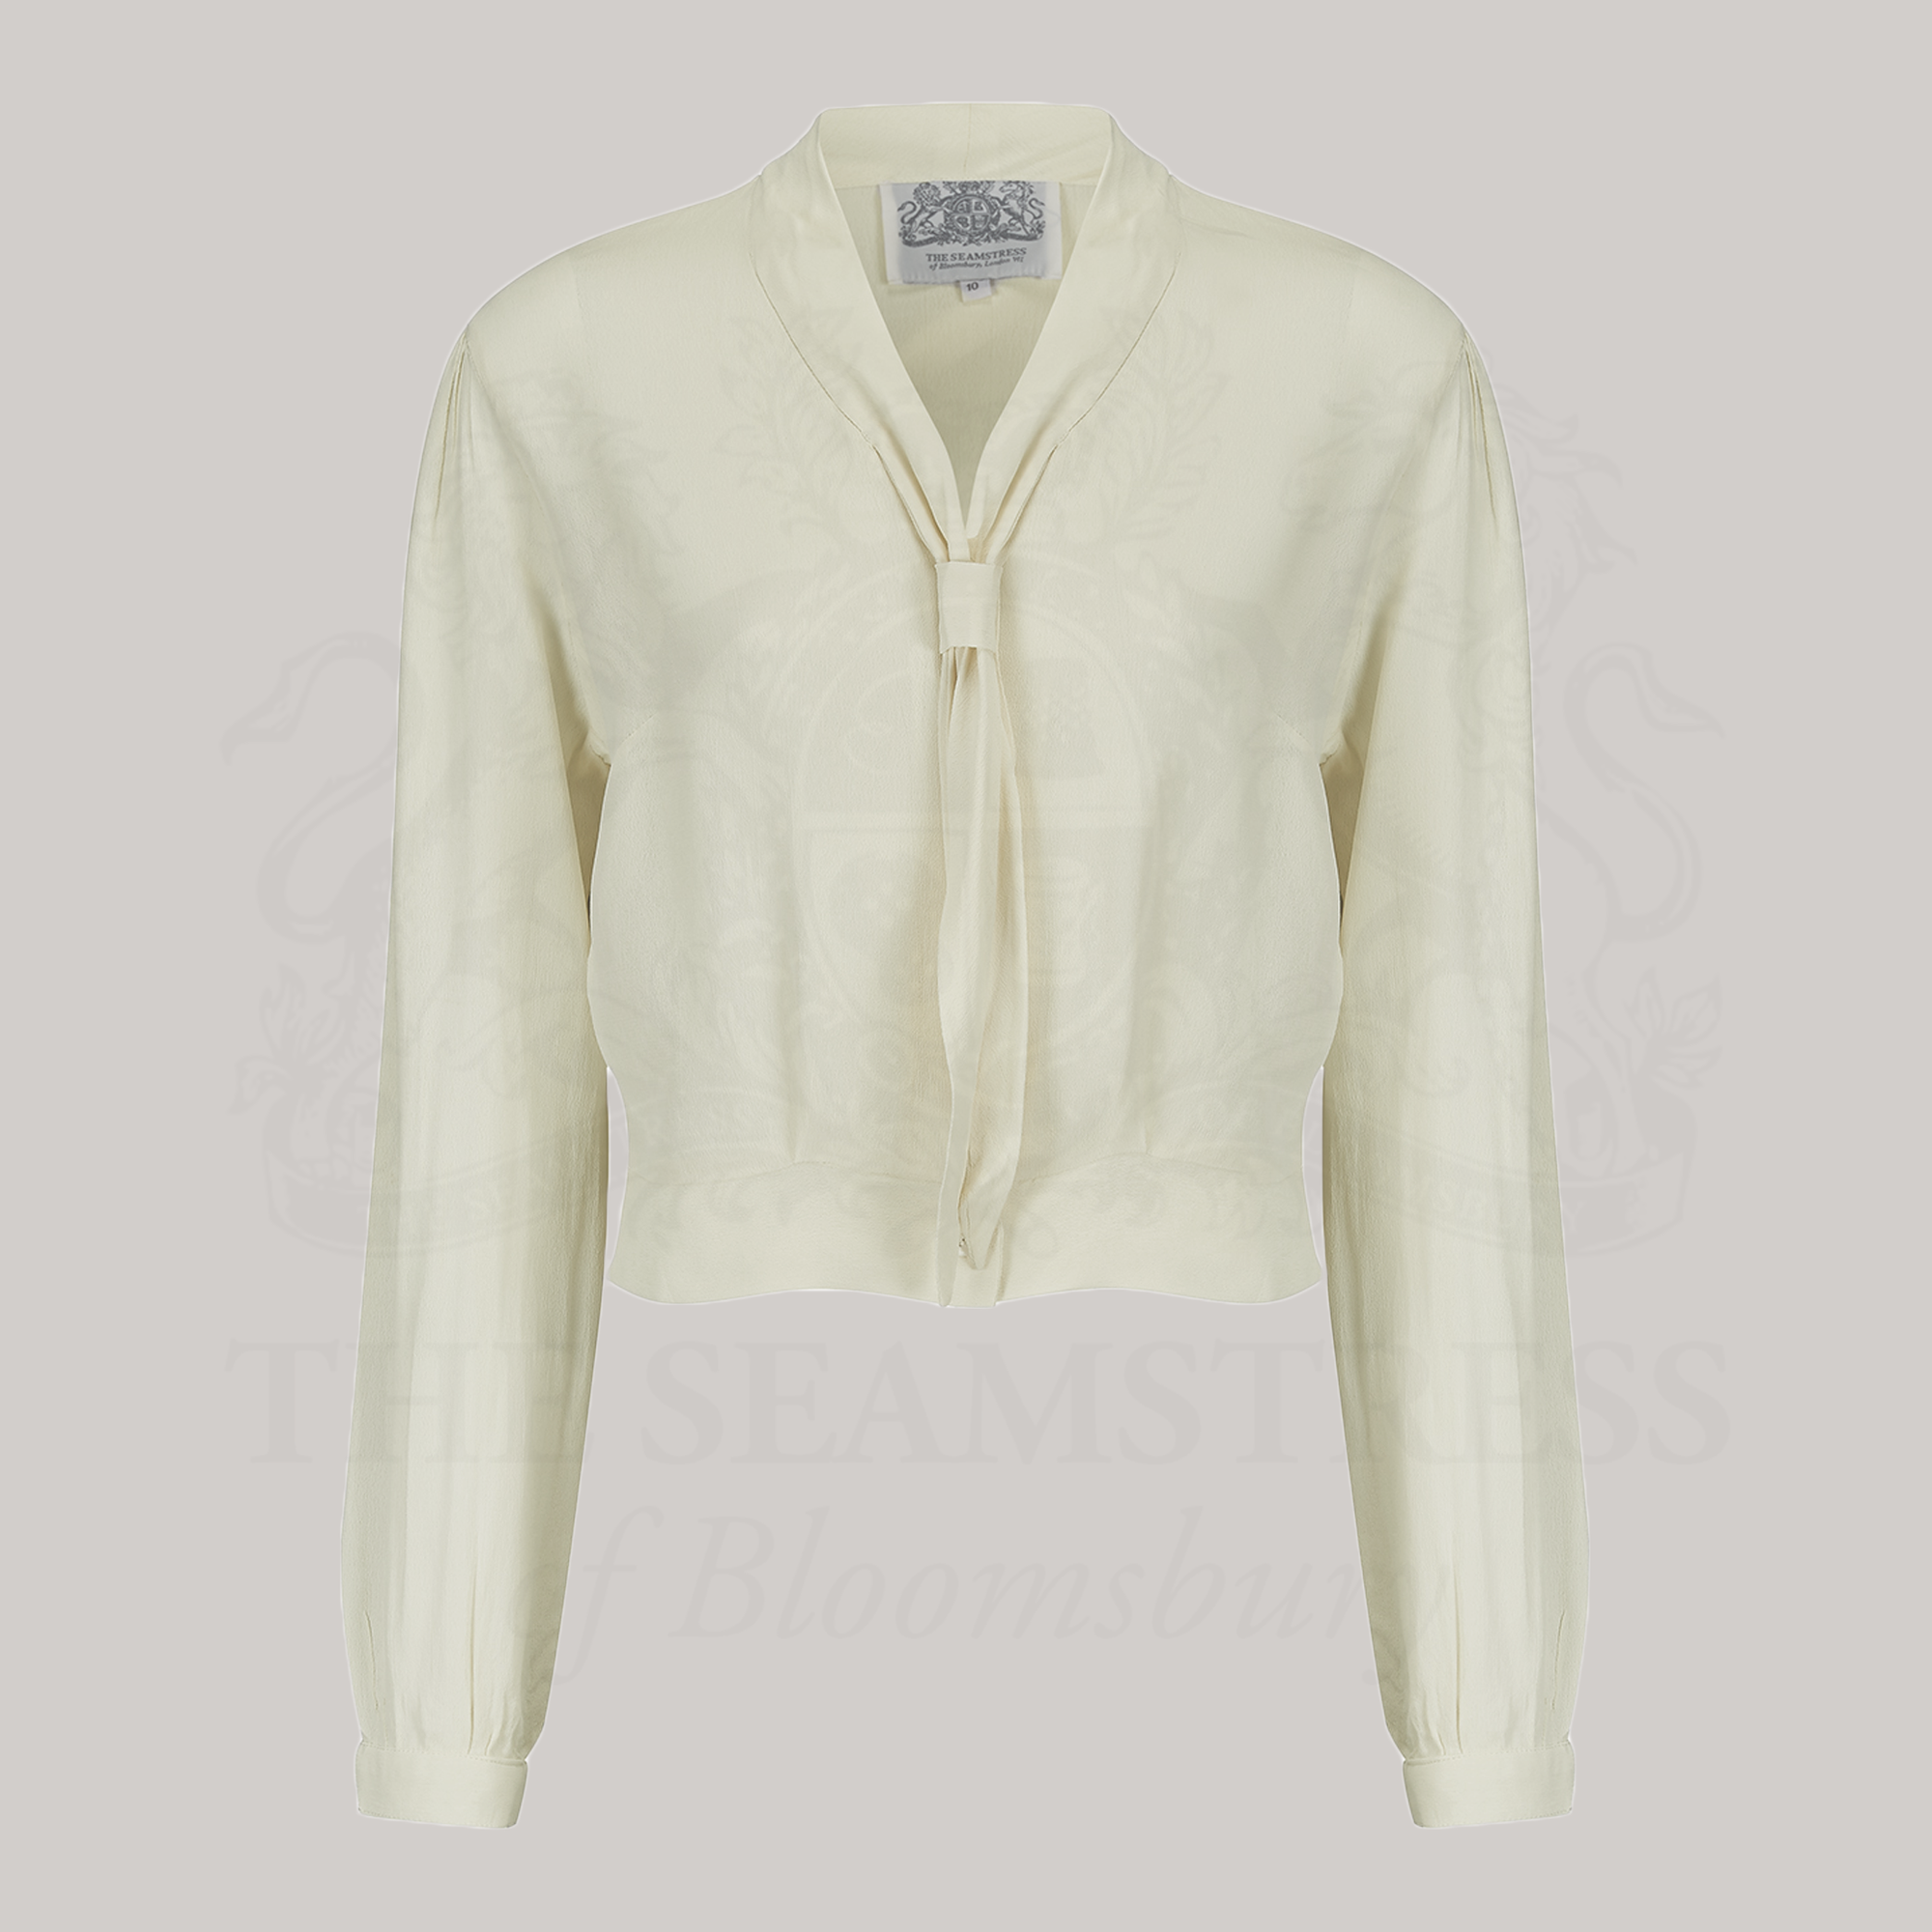 A 1940s sailor style blouse with long sleeves in cream. Featuring a roll style collar to give the iconic sailor look. Small buttons run down the front of the blouse for fastening but are hidden by the long collar.